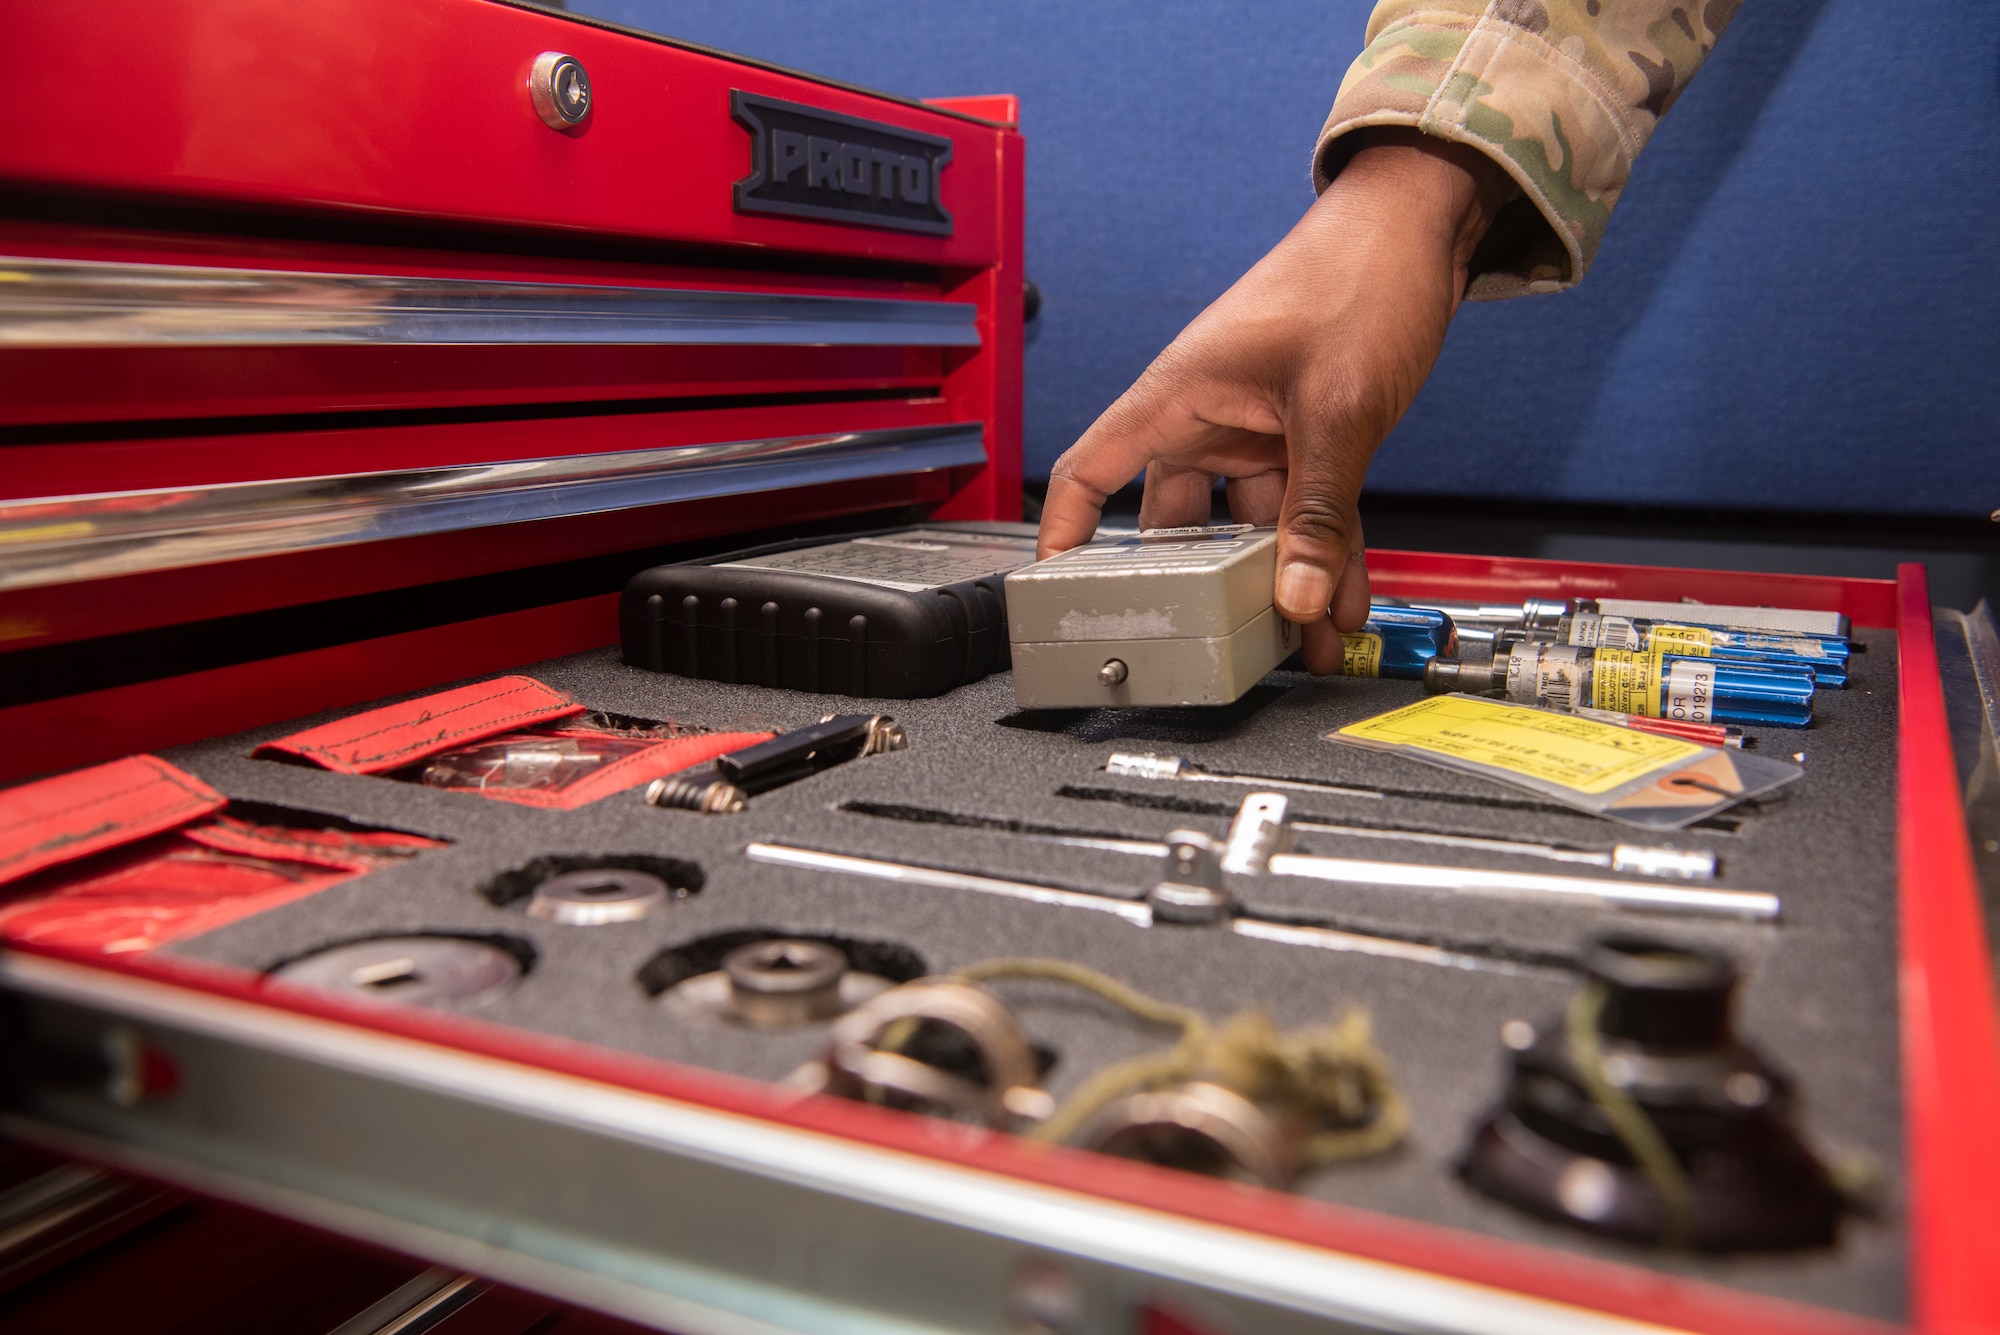 Tech. Sgt. Alexander Johnston, 100th Operations Support Squadron aircrew flight equipment lead trainer, retrieves a tool while repairing a piece of equipment at RAF Mildenhall, England, Dec. 3, 2019. Aircrew flight equipment Airmen inspect gear on a regular cycle to confirm it is free of defects. (U.S. Air Force photo by Airman 1st Class Joseph Barron)